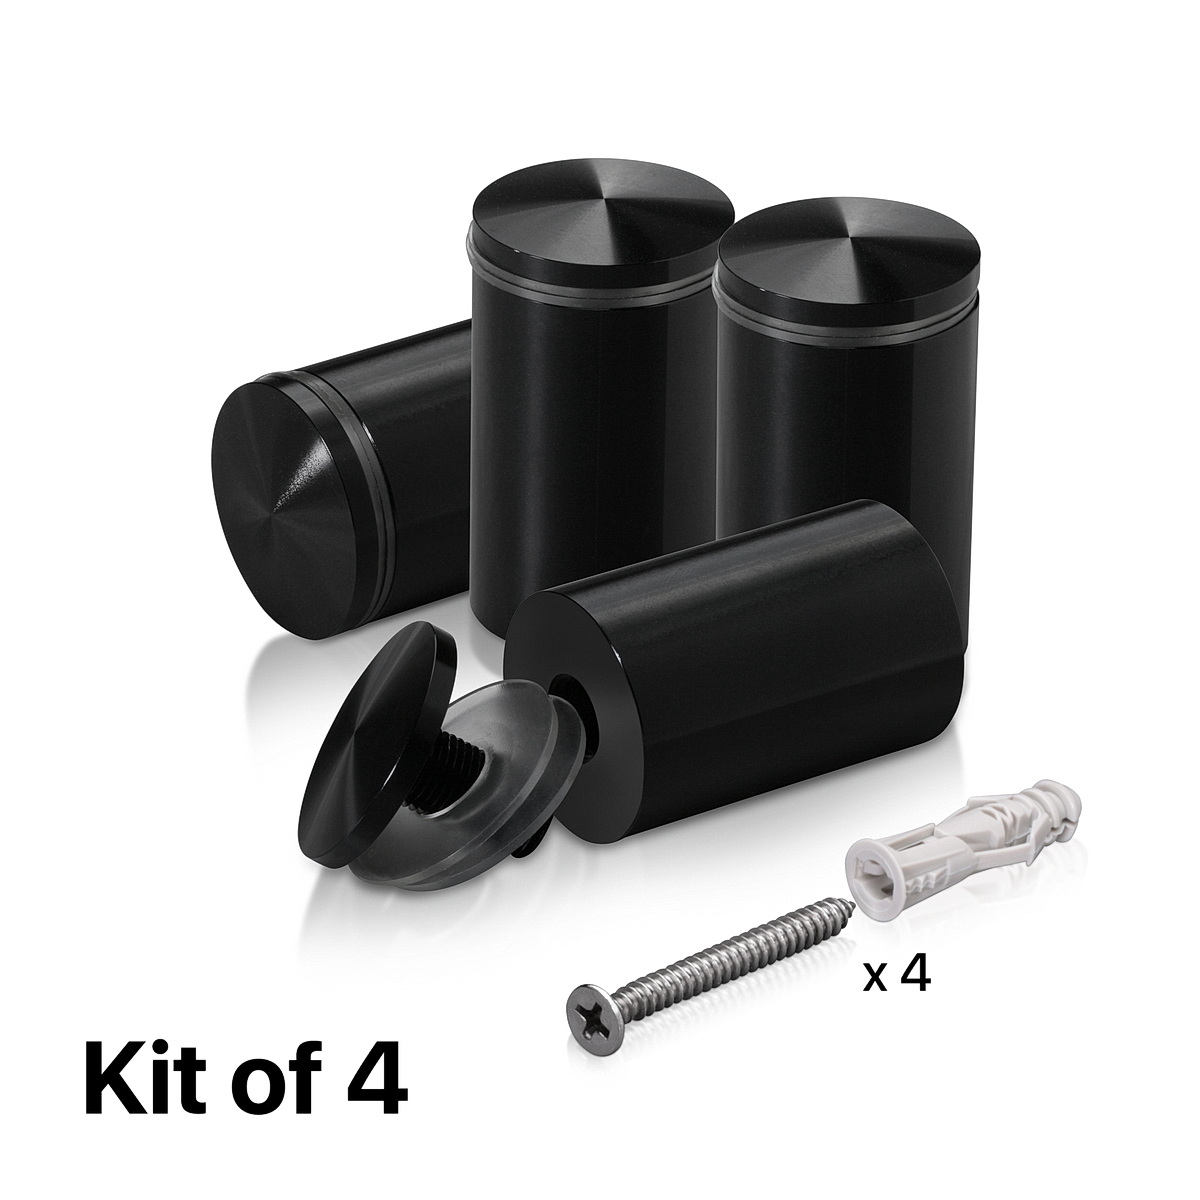 (Set of 4) 1-1/4'' Diameter X 1-3/4'' Barrel Length, Aluminum Rounded Head Standoffs, Black Anodized Finish Standoff with (4) 2216Z Screws and (4) LANC1 Anchors for concrete or drywall (For Inside / Outside use) [Required Material Hole Size: 7/16'']